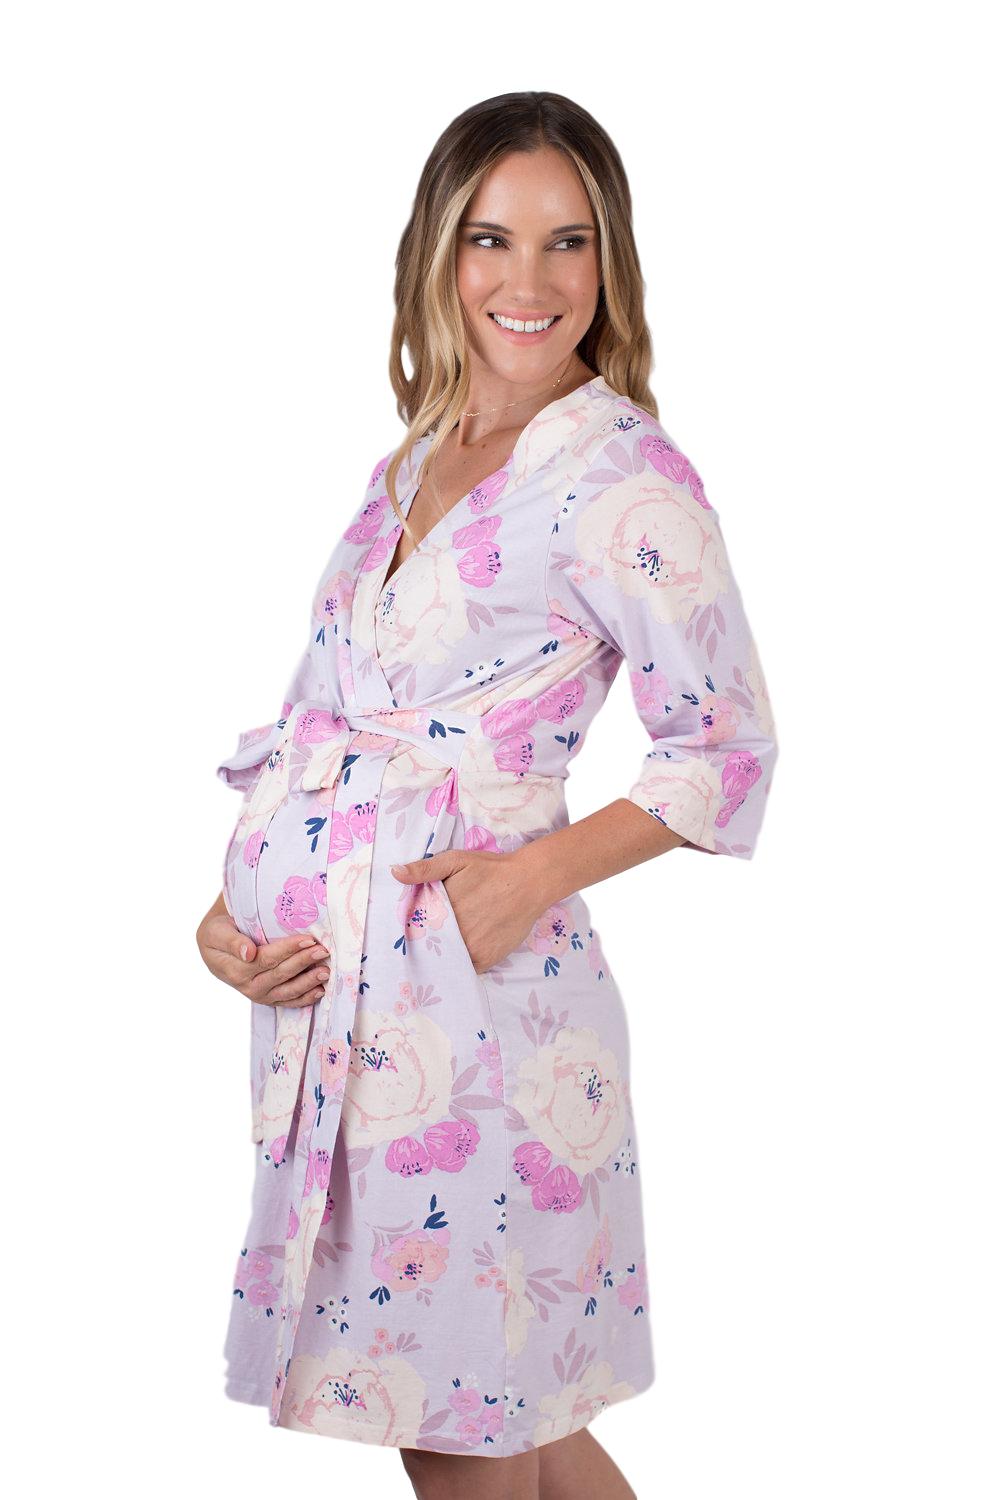 Purple Floral Posy Patterend Maternity Robe Hospital Gown, Delivery Robe,  Labor Gown, Delivery Gown, Nursing Robe, Pregnancy Robe 